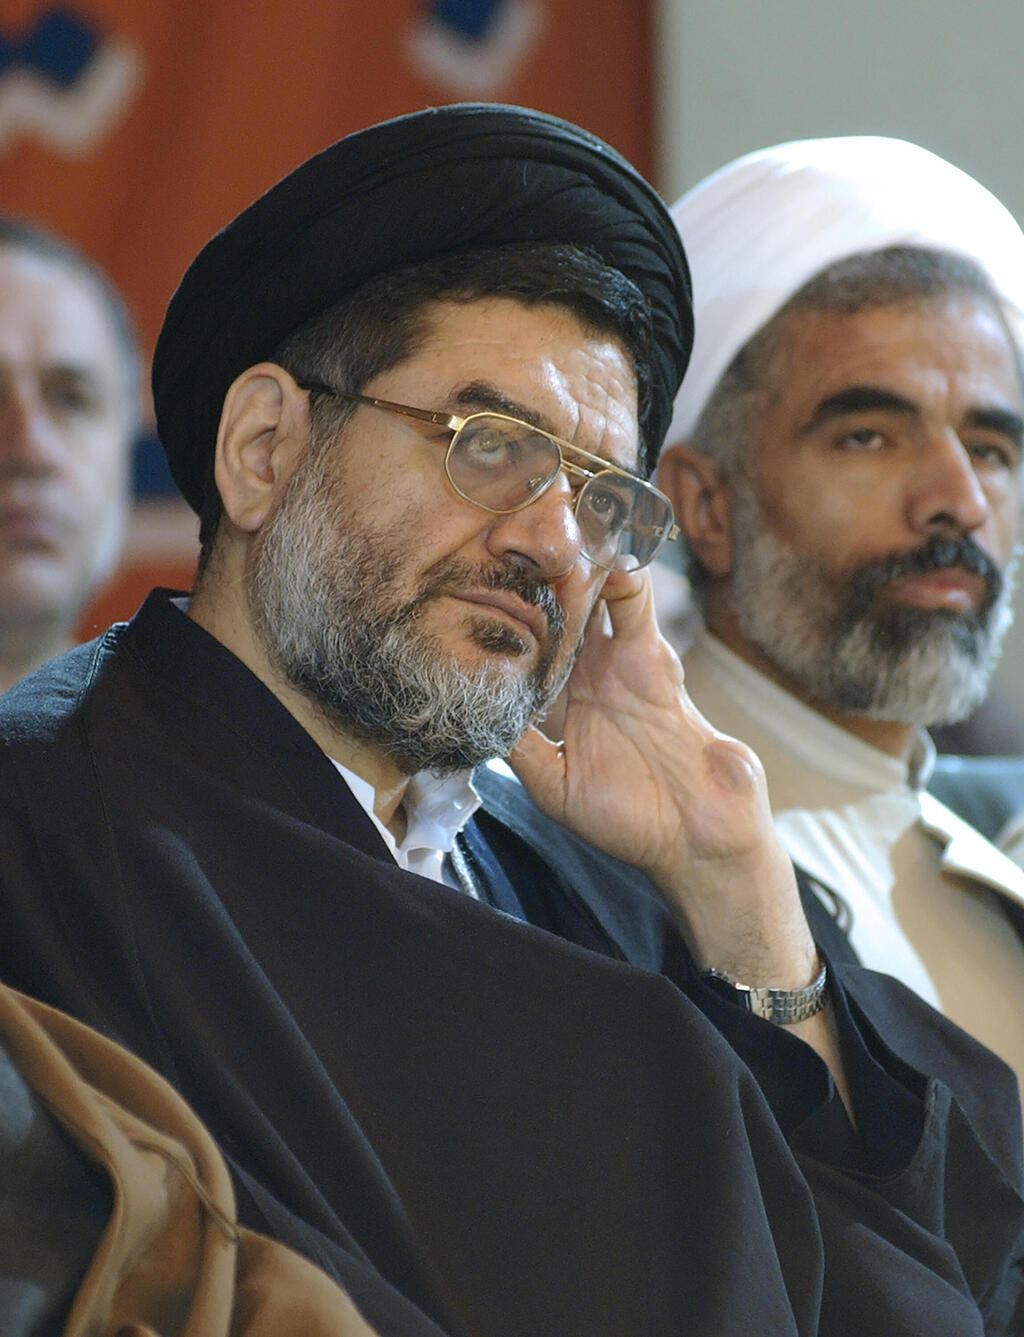 Ali Akbar Mohtashamipour listens to a speaker in a meeting in Tehran, Iran, on Dec. 4, 2003